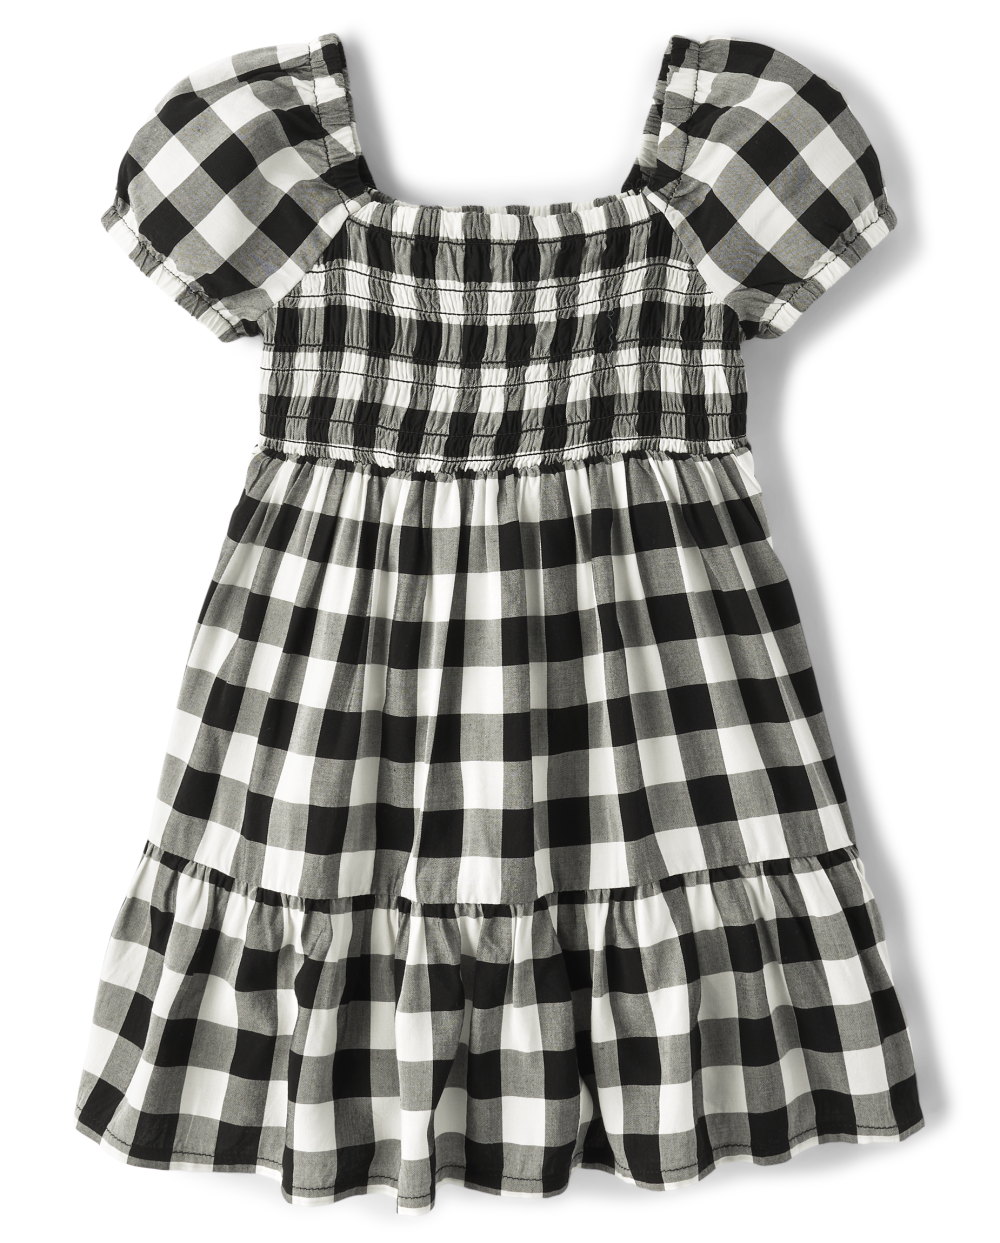 Toddler Puff Sleeves Short Sleeves Sleeves Rayon Above the Knee Checkered Gingham Print Smocked Square Neck Dress With Ruffles